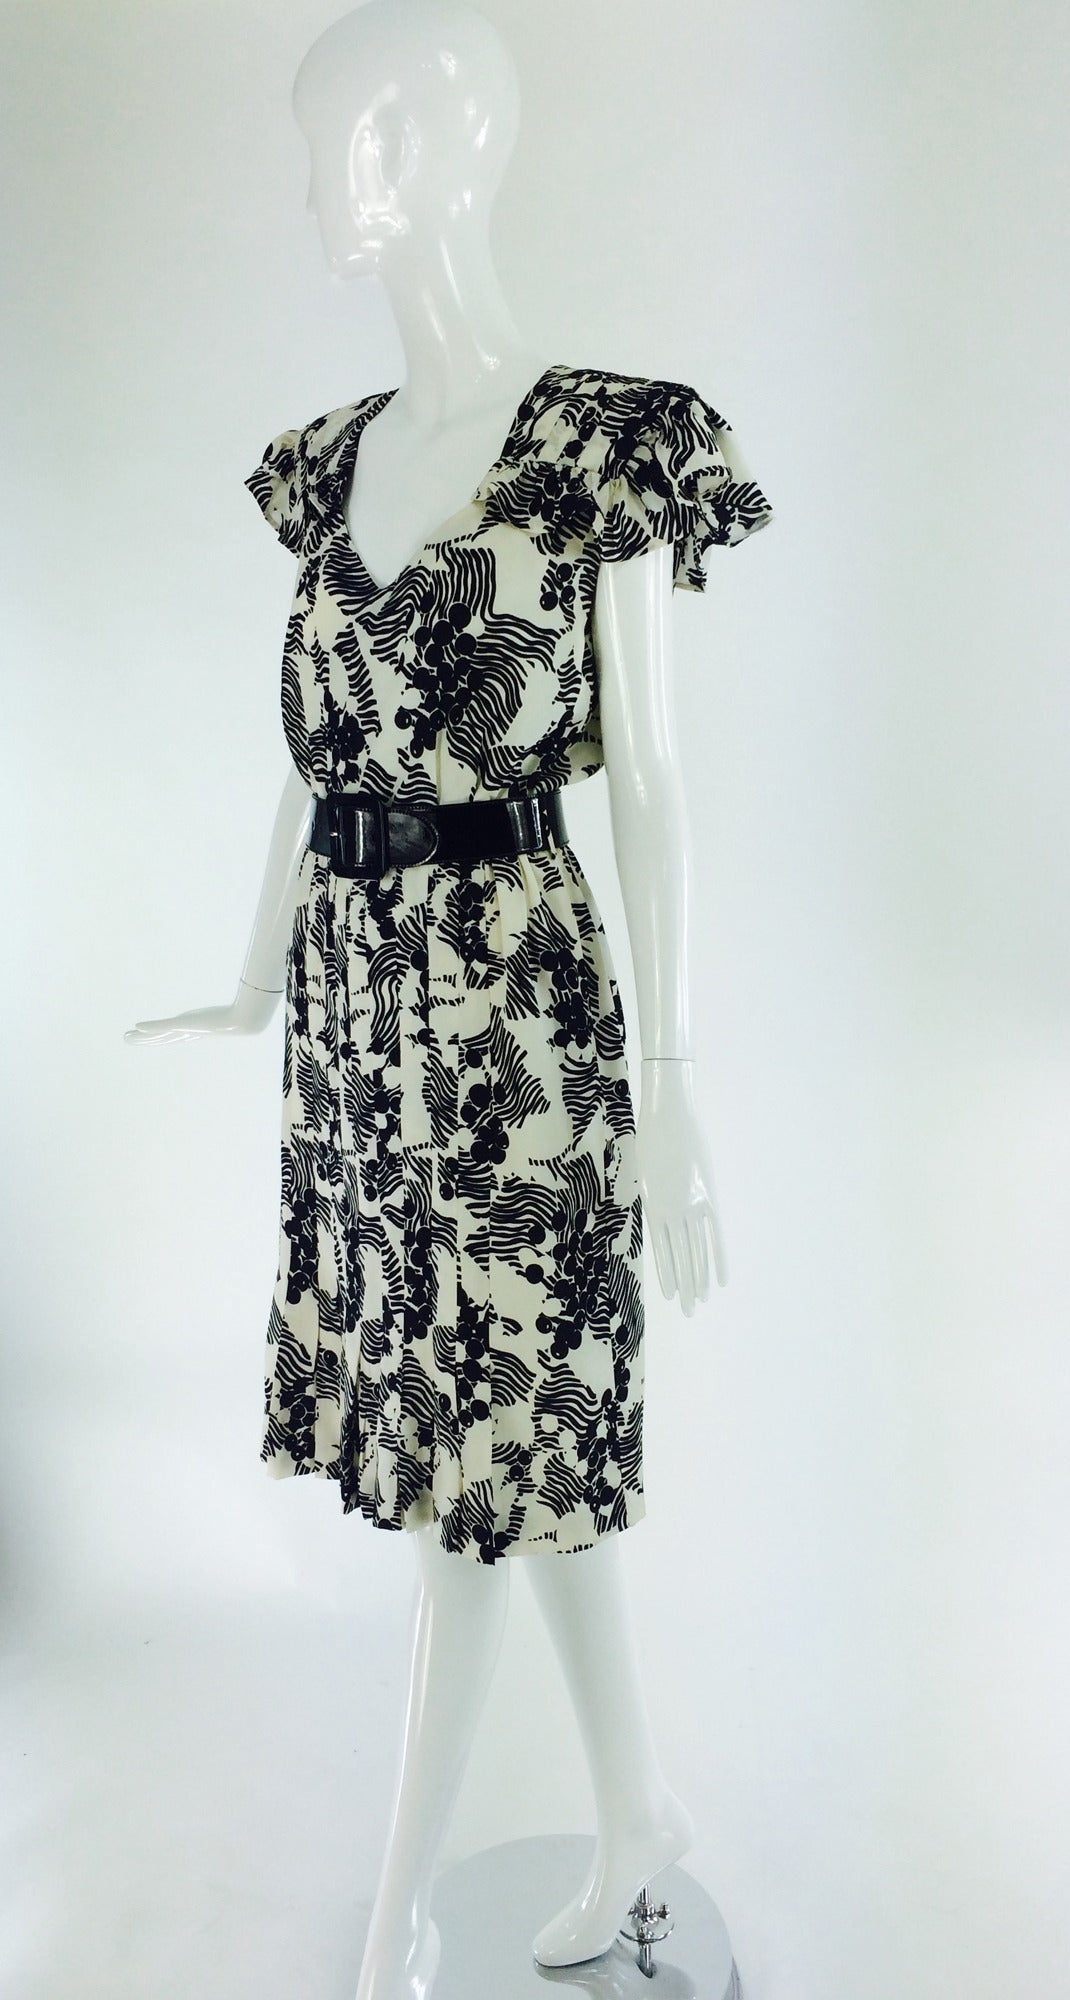 Andre Laug early 1990s black & white silk print dress...Deep V neckline, short ruffle pleated shoulder, shoulders are padded...The skirt has stitch down pleats at the front, side seam pockets and soft gathering at the waist back...The dress is fully